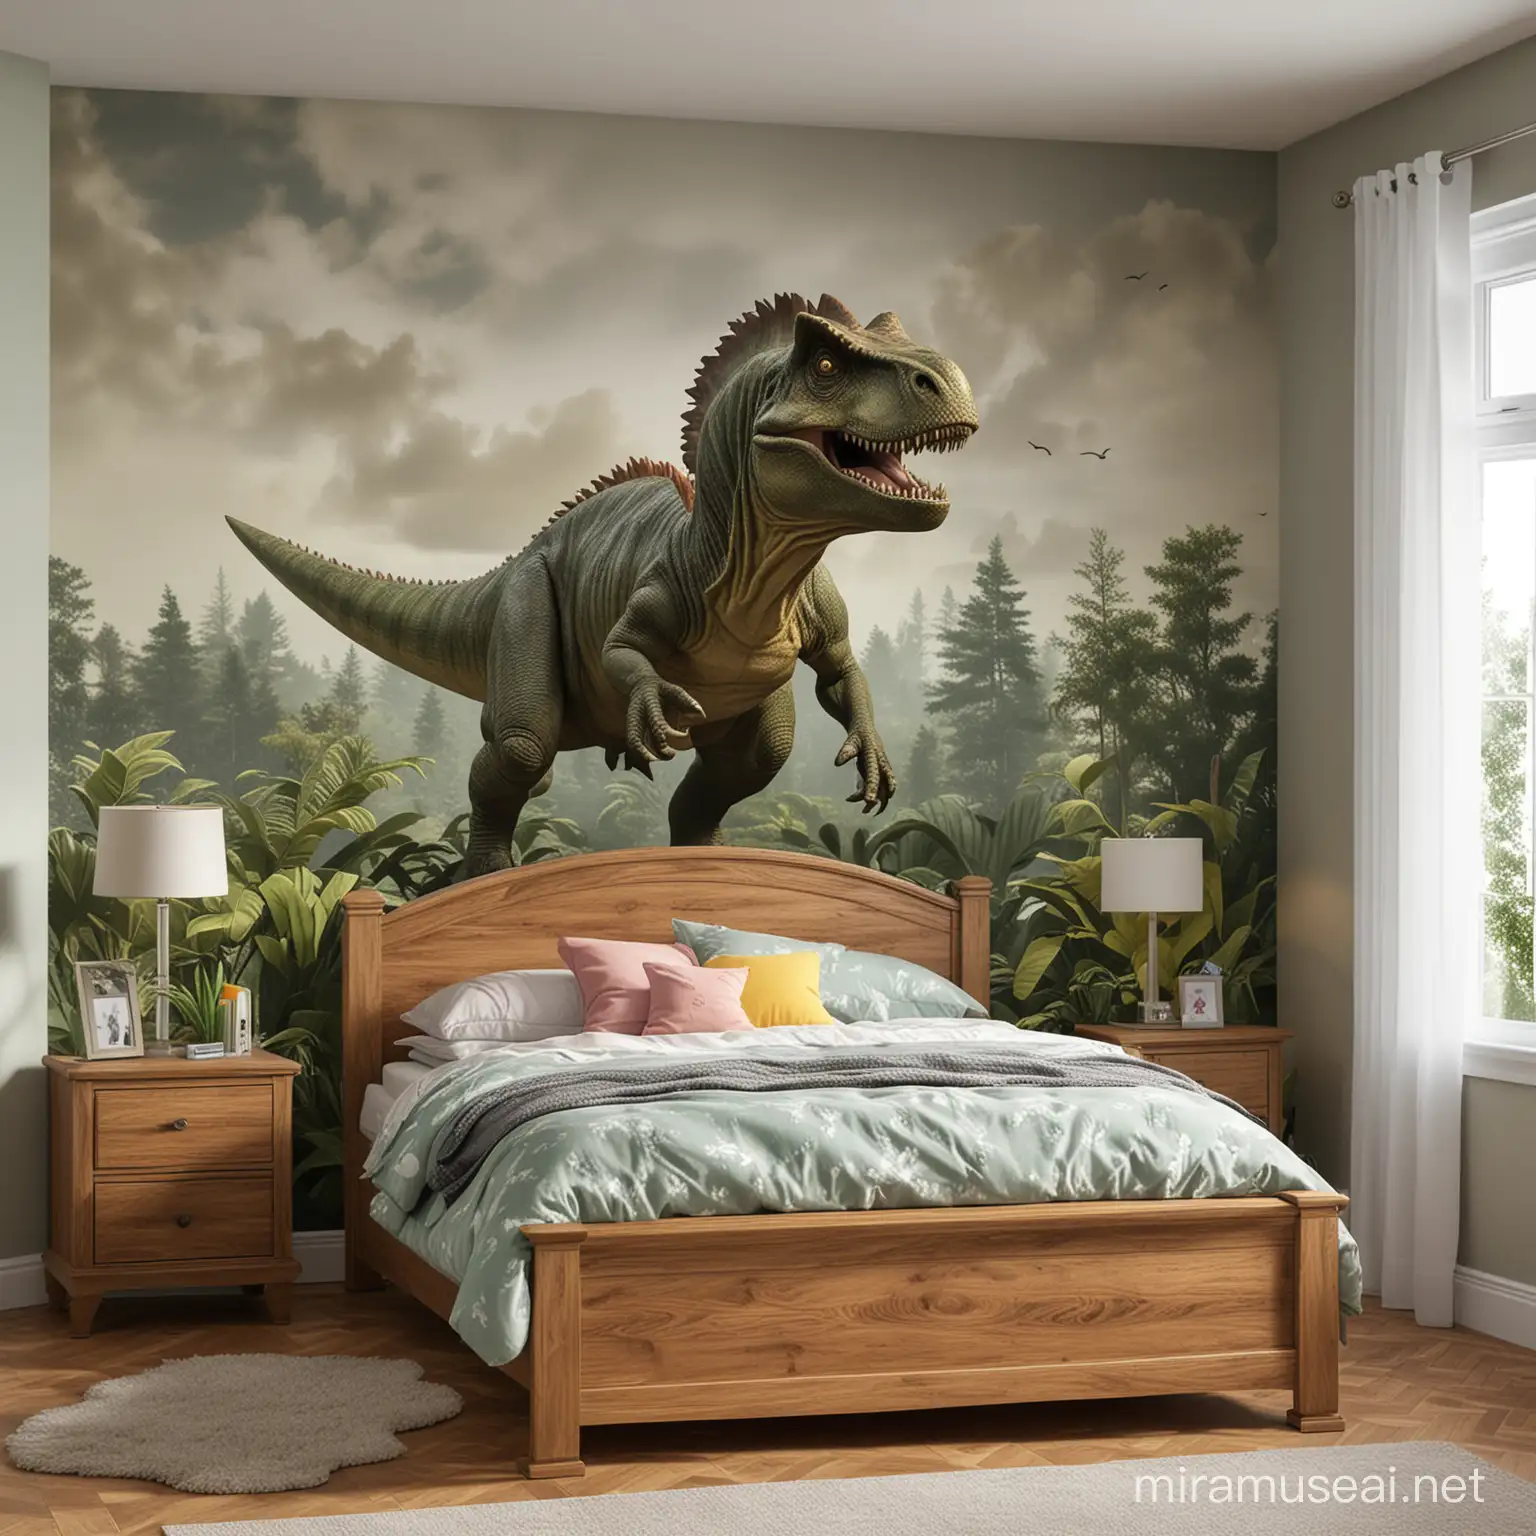 Create a  realistic photo of a child's bedroom where the bed is shaped like a dinasour